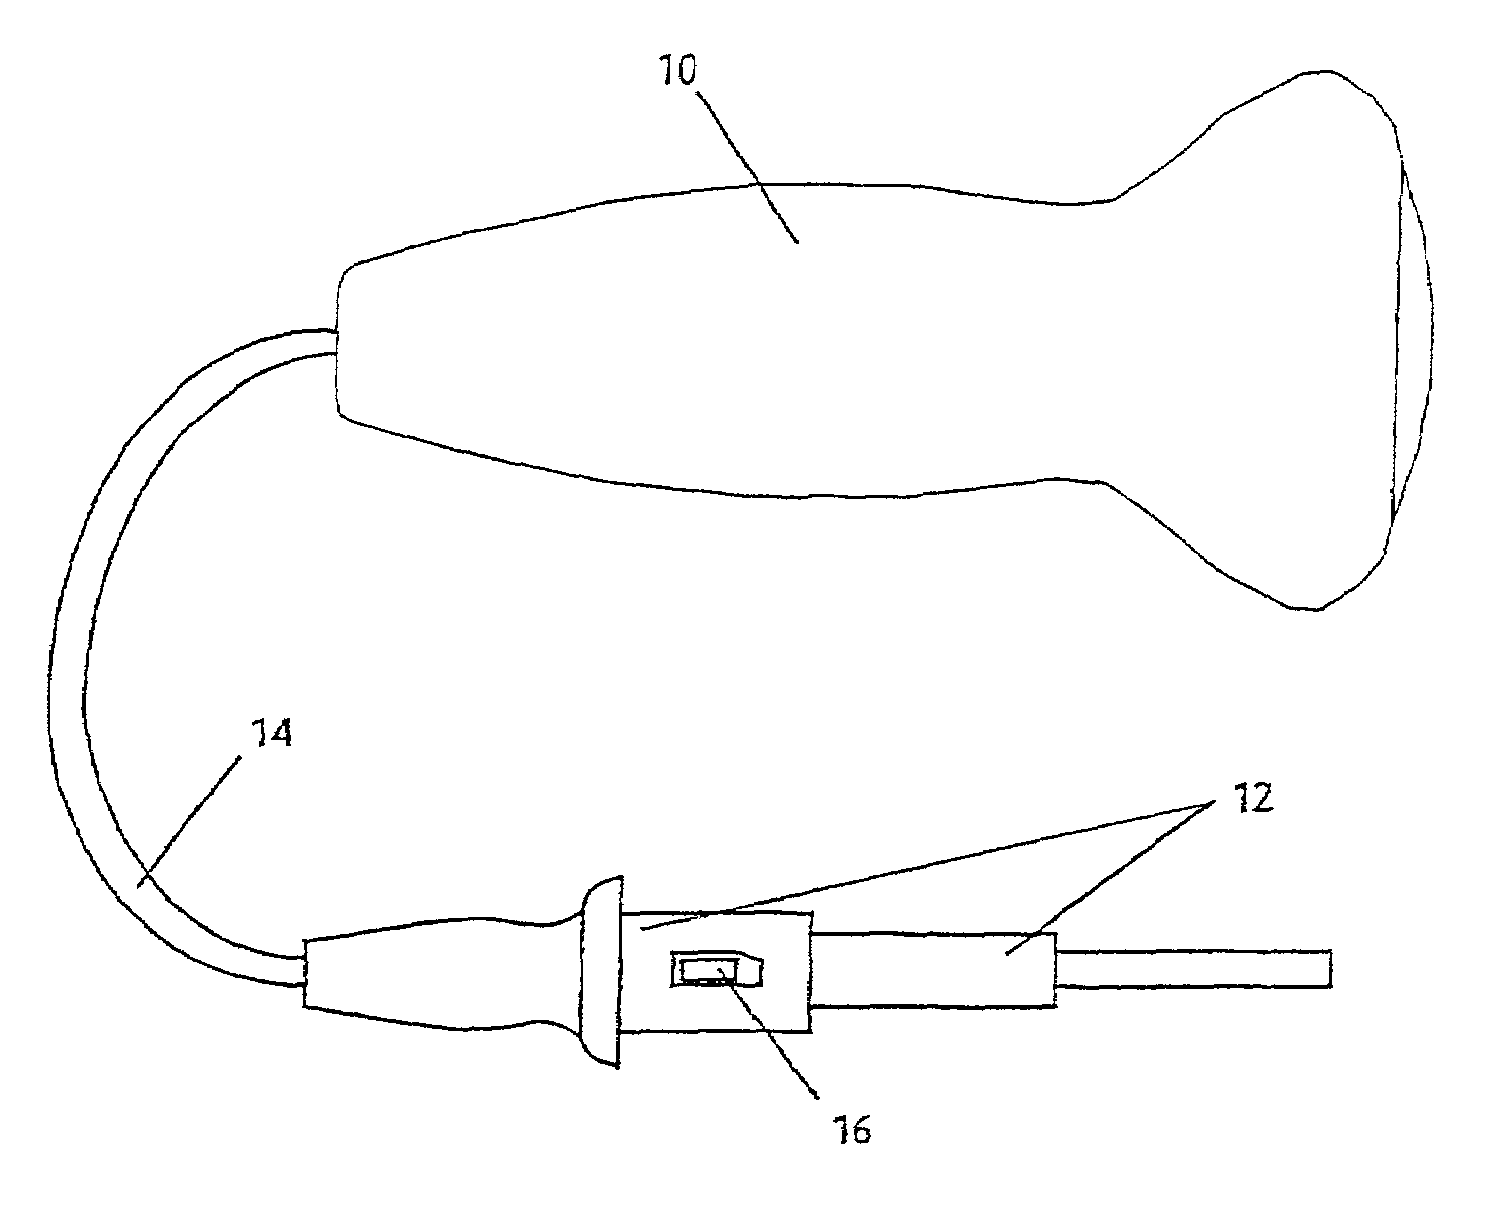 Apparatus for administering acoustic shock waves having a removable and replaceable component with a data storage medium